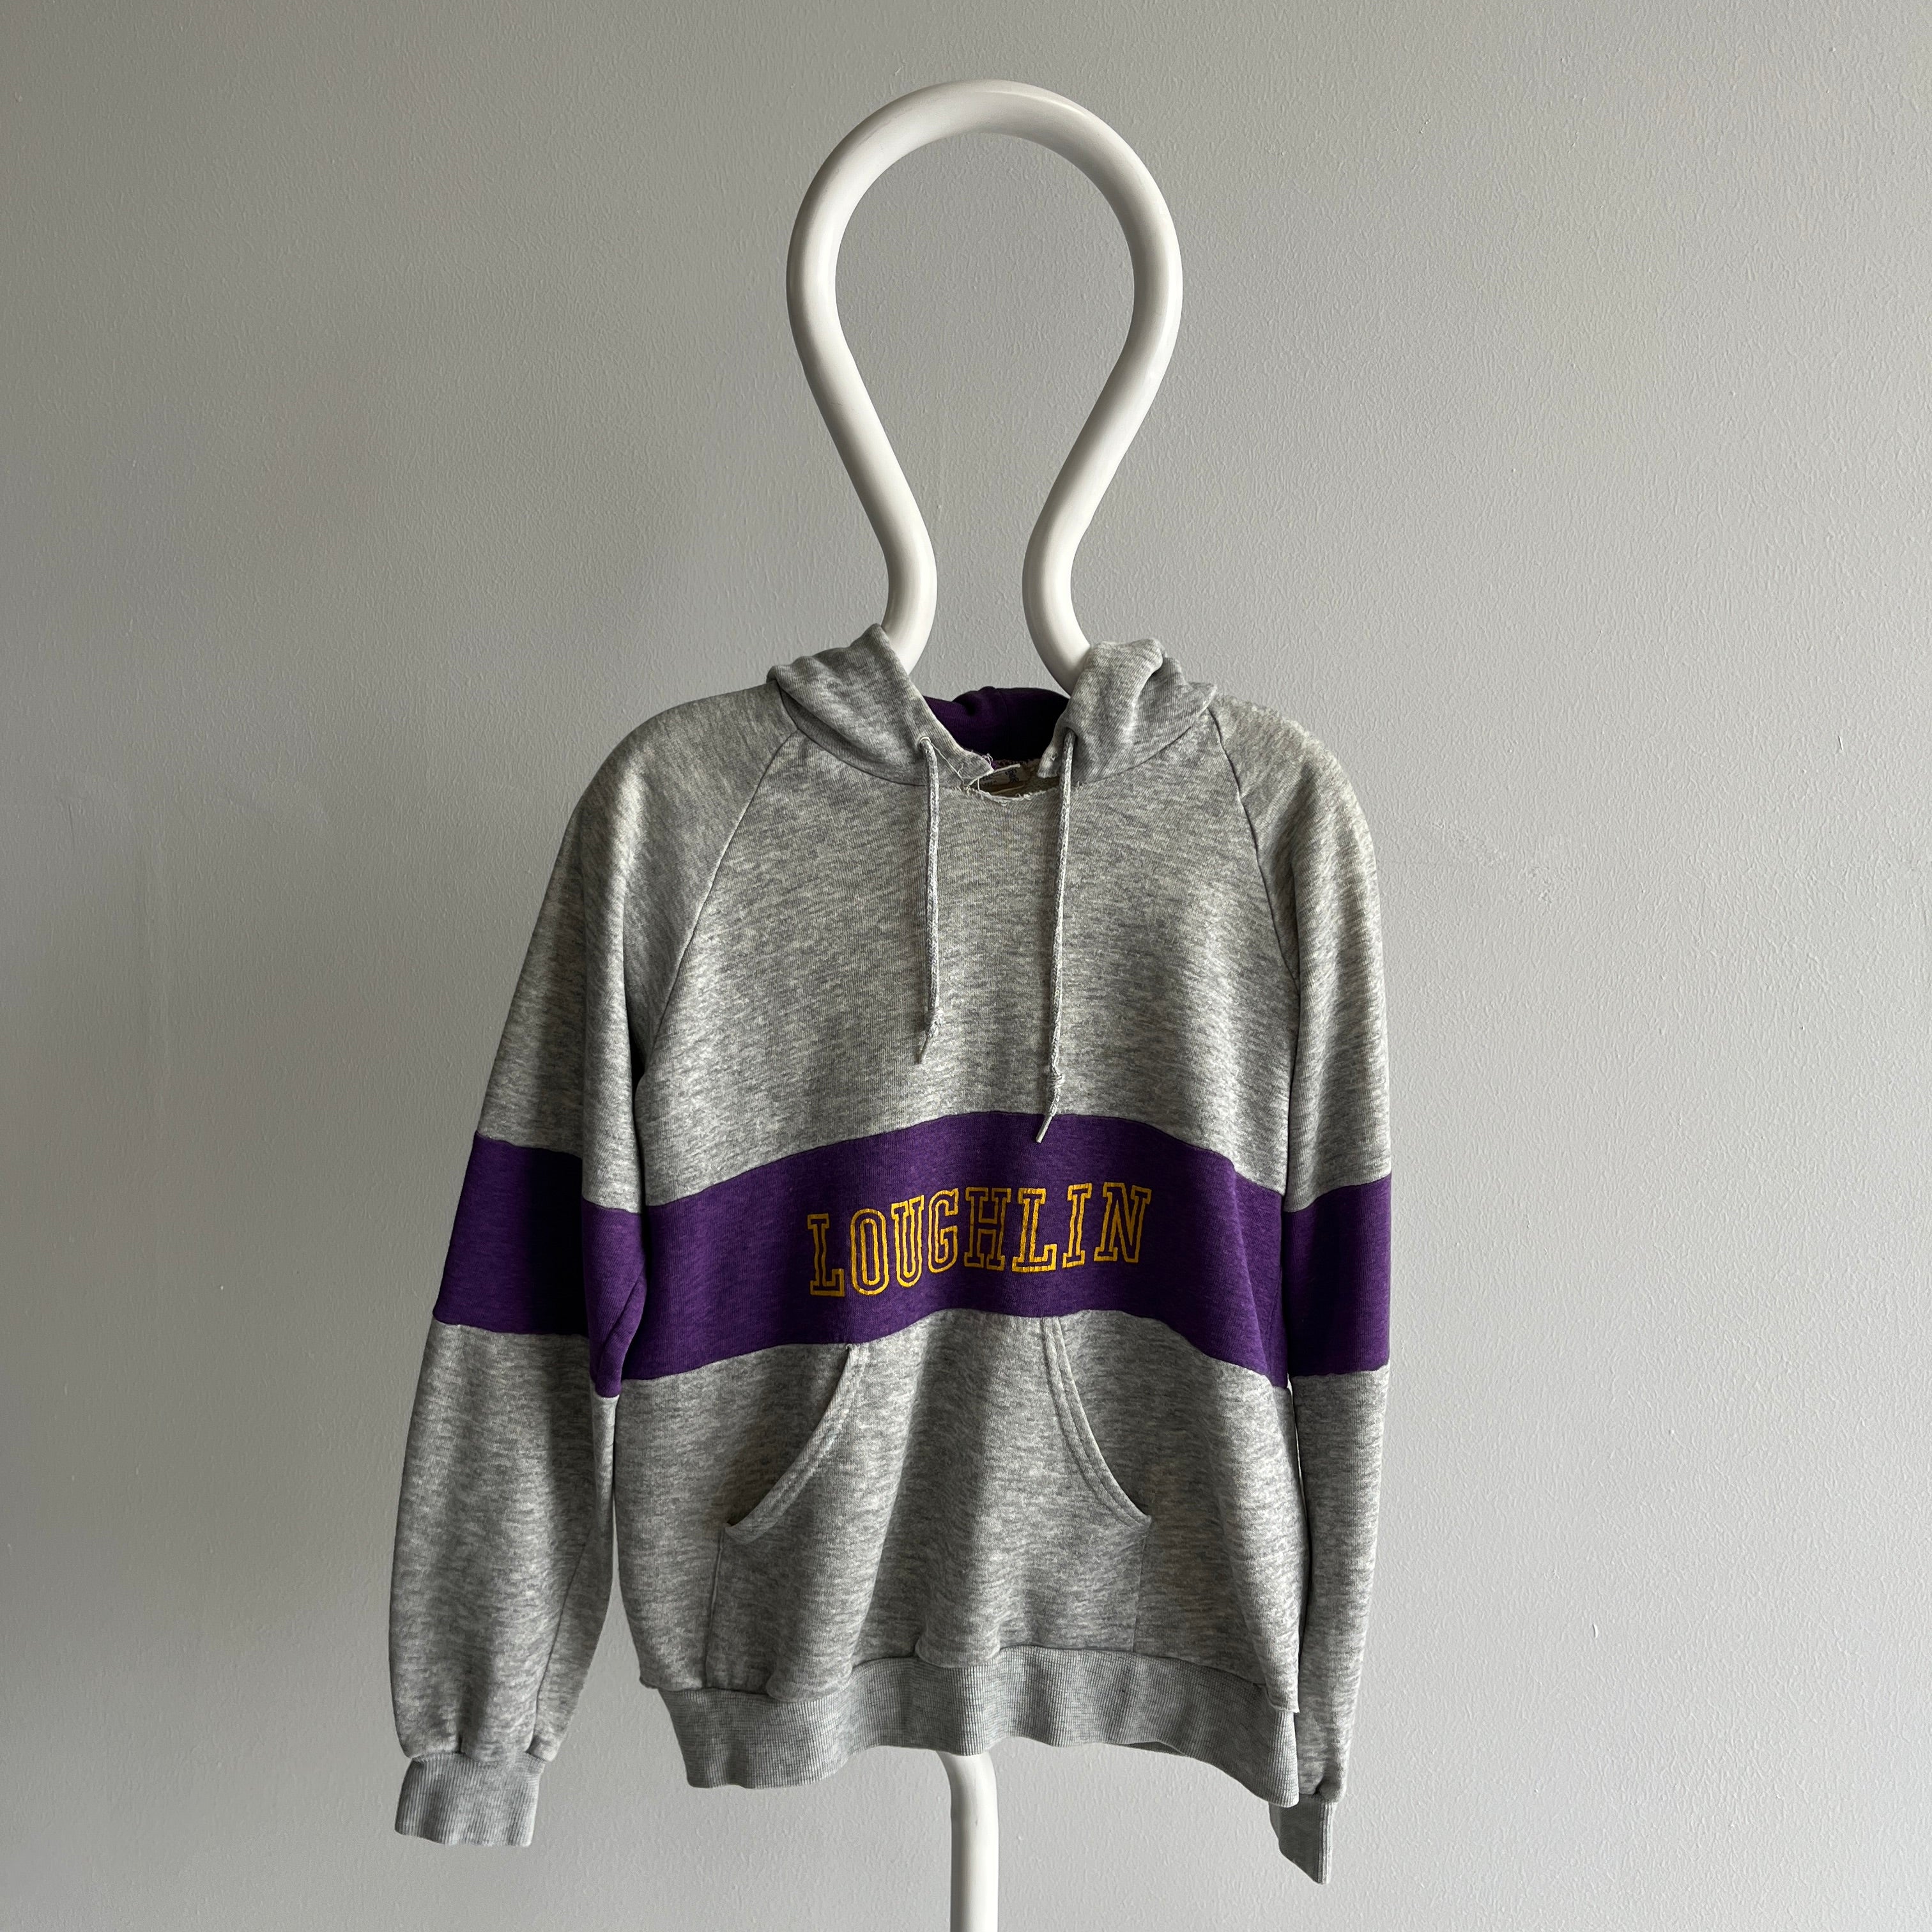 1980s Loughlin Thinned Out Bassett Walker Two Tone Hoodie with Wear